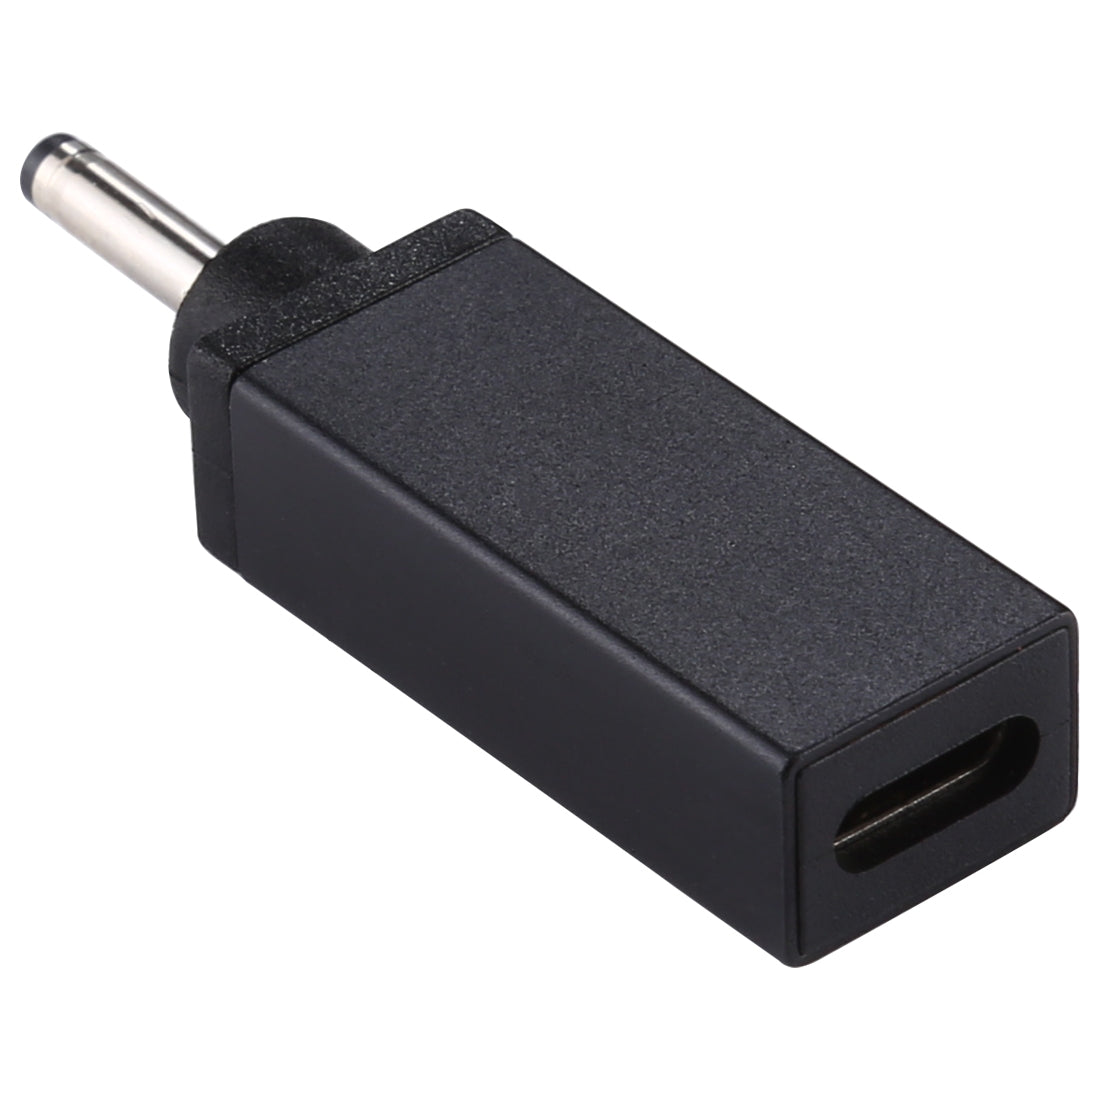 PD 18.5V-20V 3.0x1.0mm Male Adapter Connector